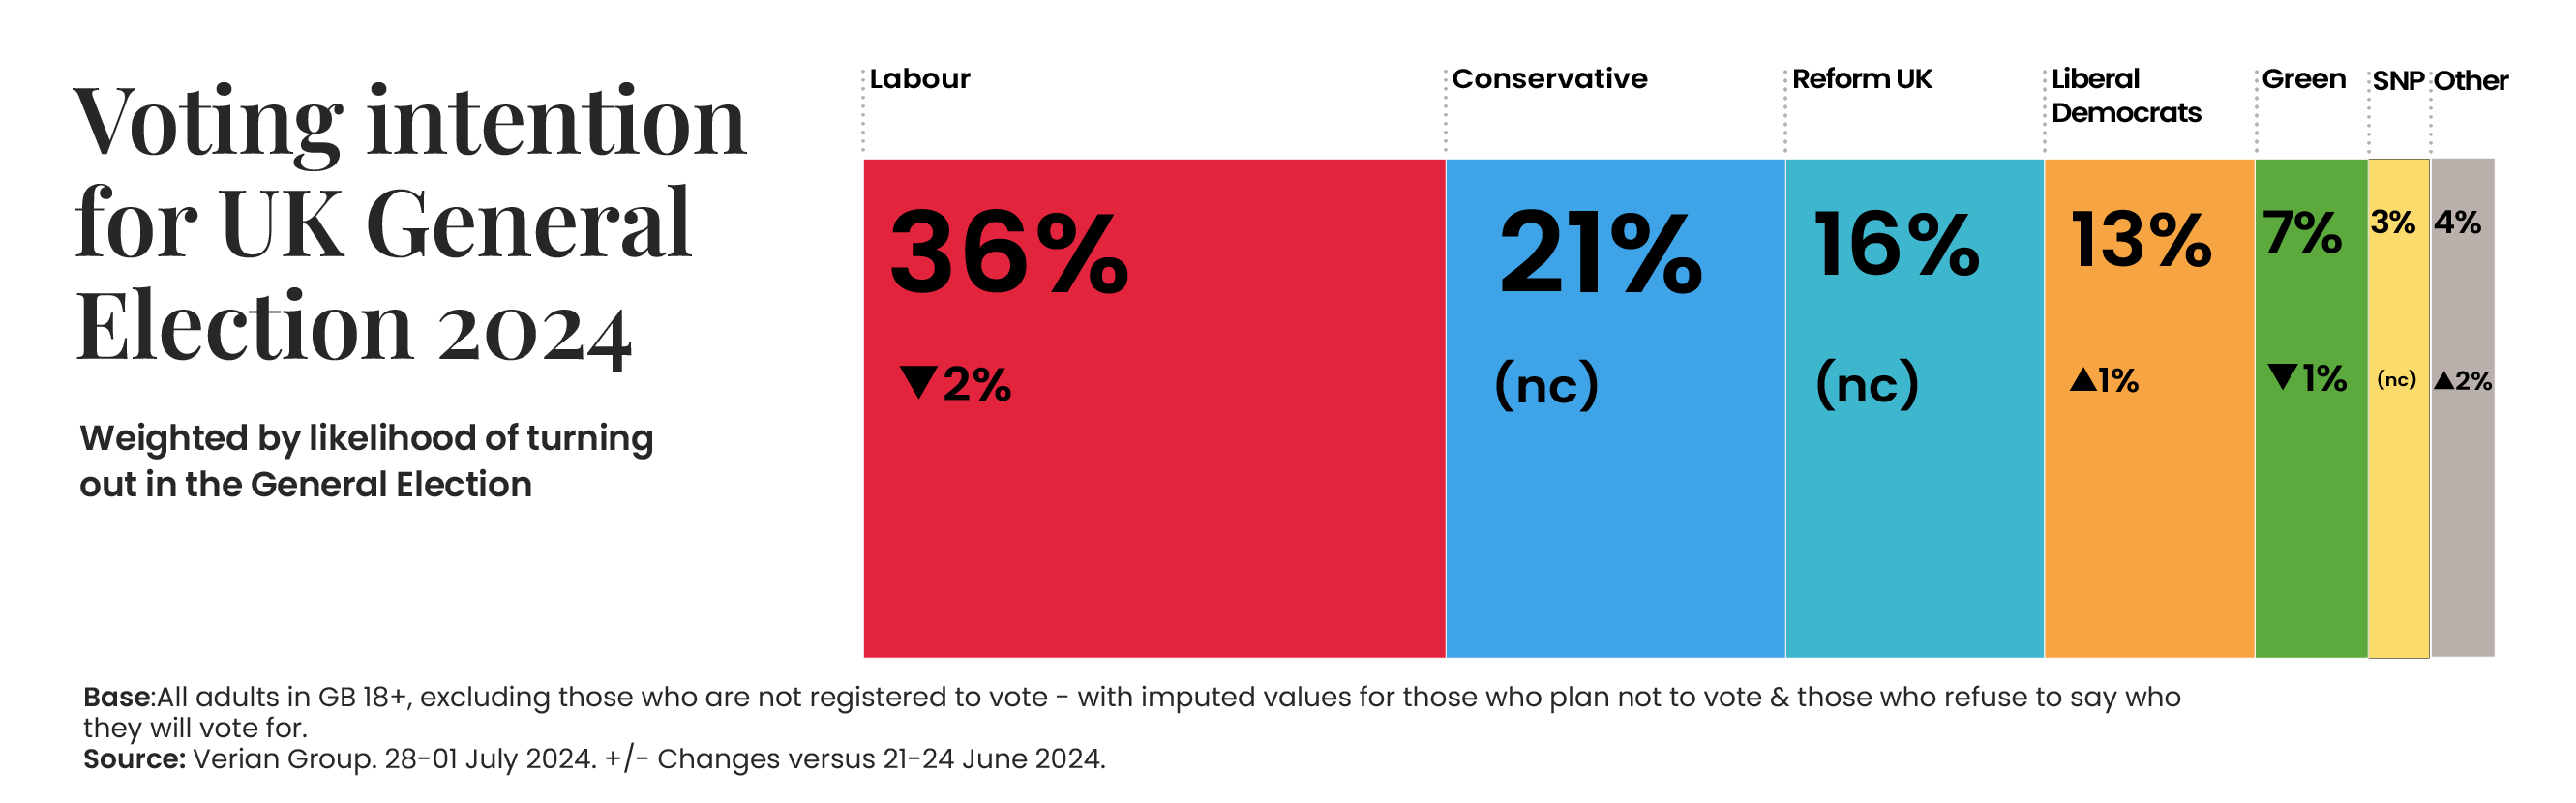 Voting Intention_2606 4